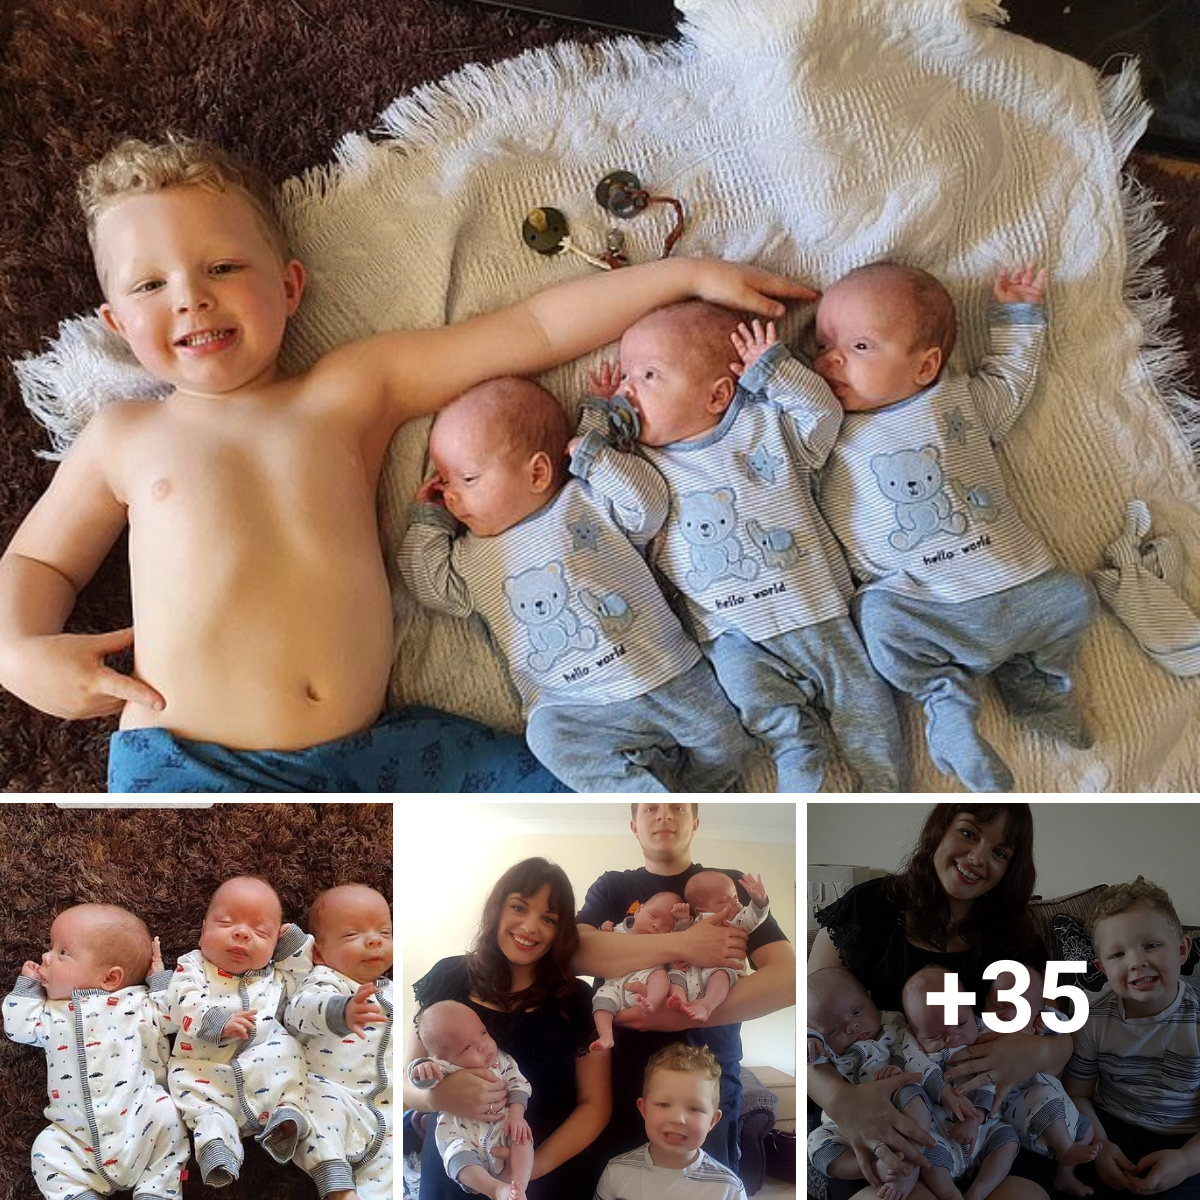 Contrary to all odds: 26-year-old mother gives birth to identical triplets naturally.